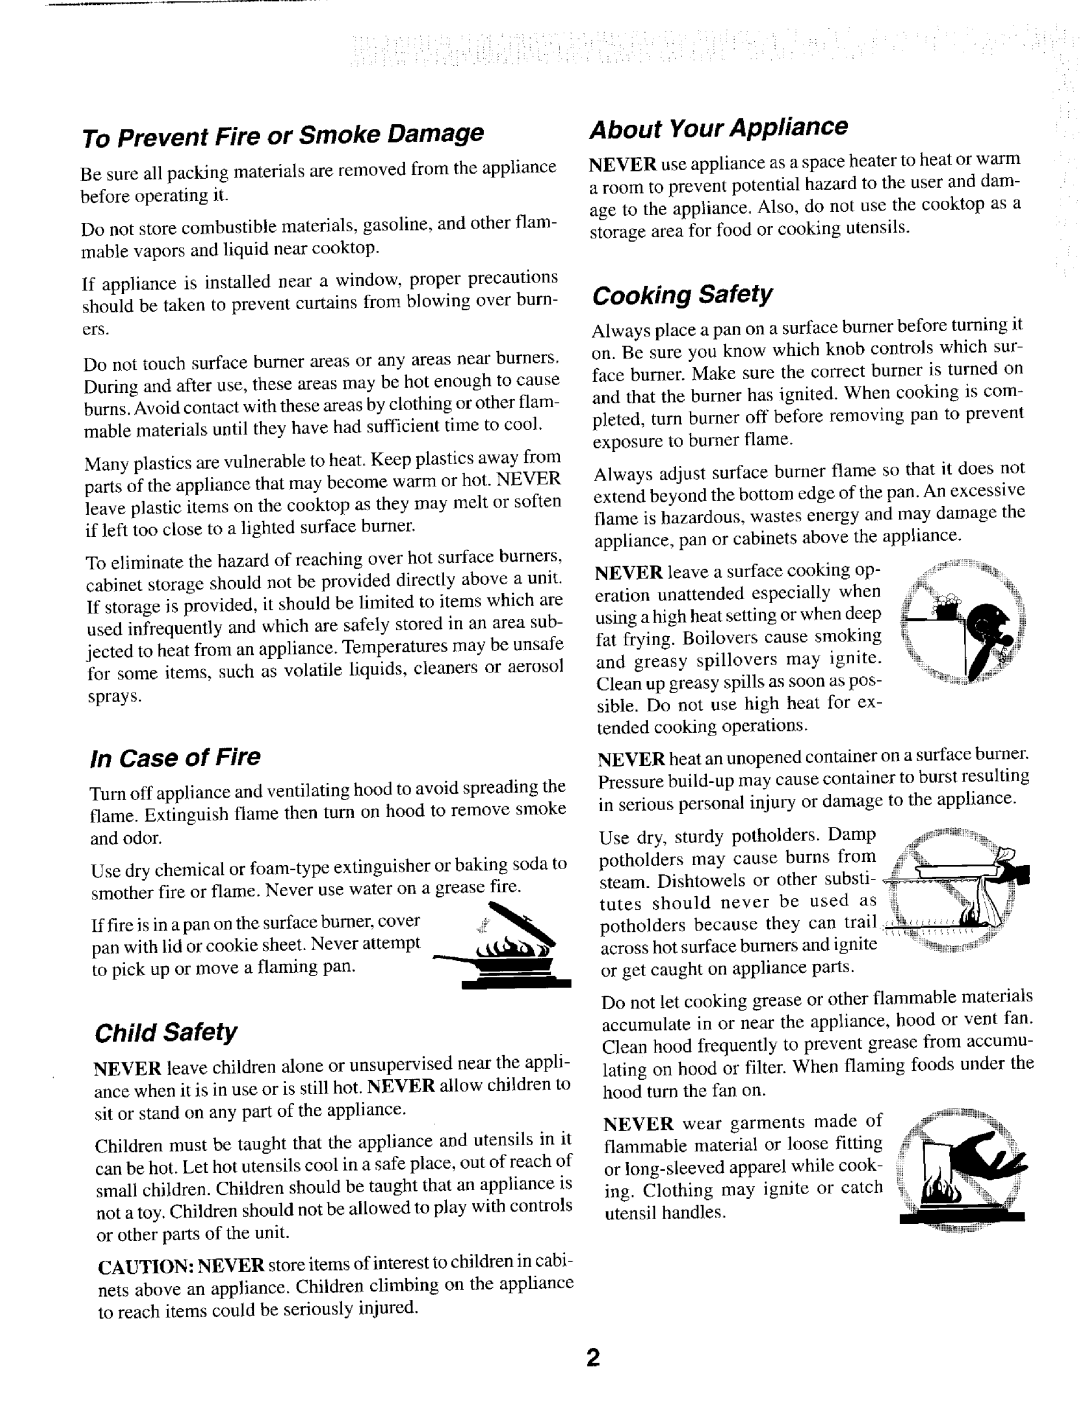 Maytag MGC5430 manual To Prevent Fire or Smoke Damage, In Case of Fire, Child Safety, About Your Appliance 